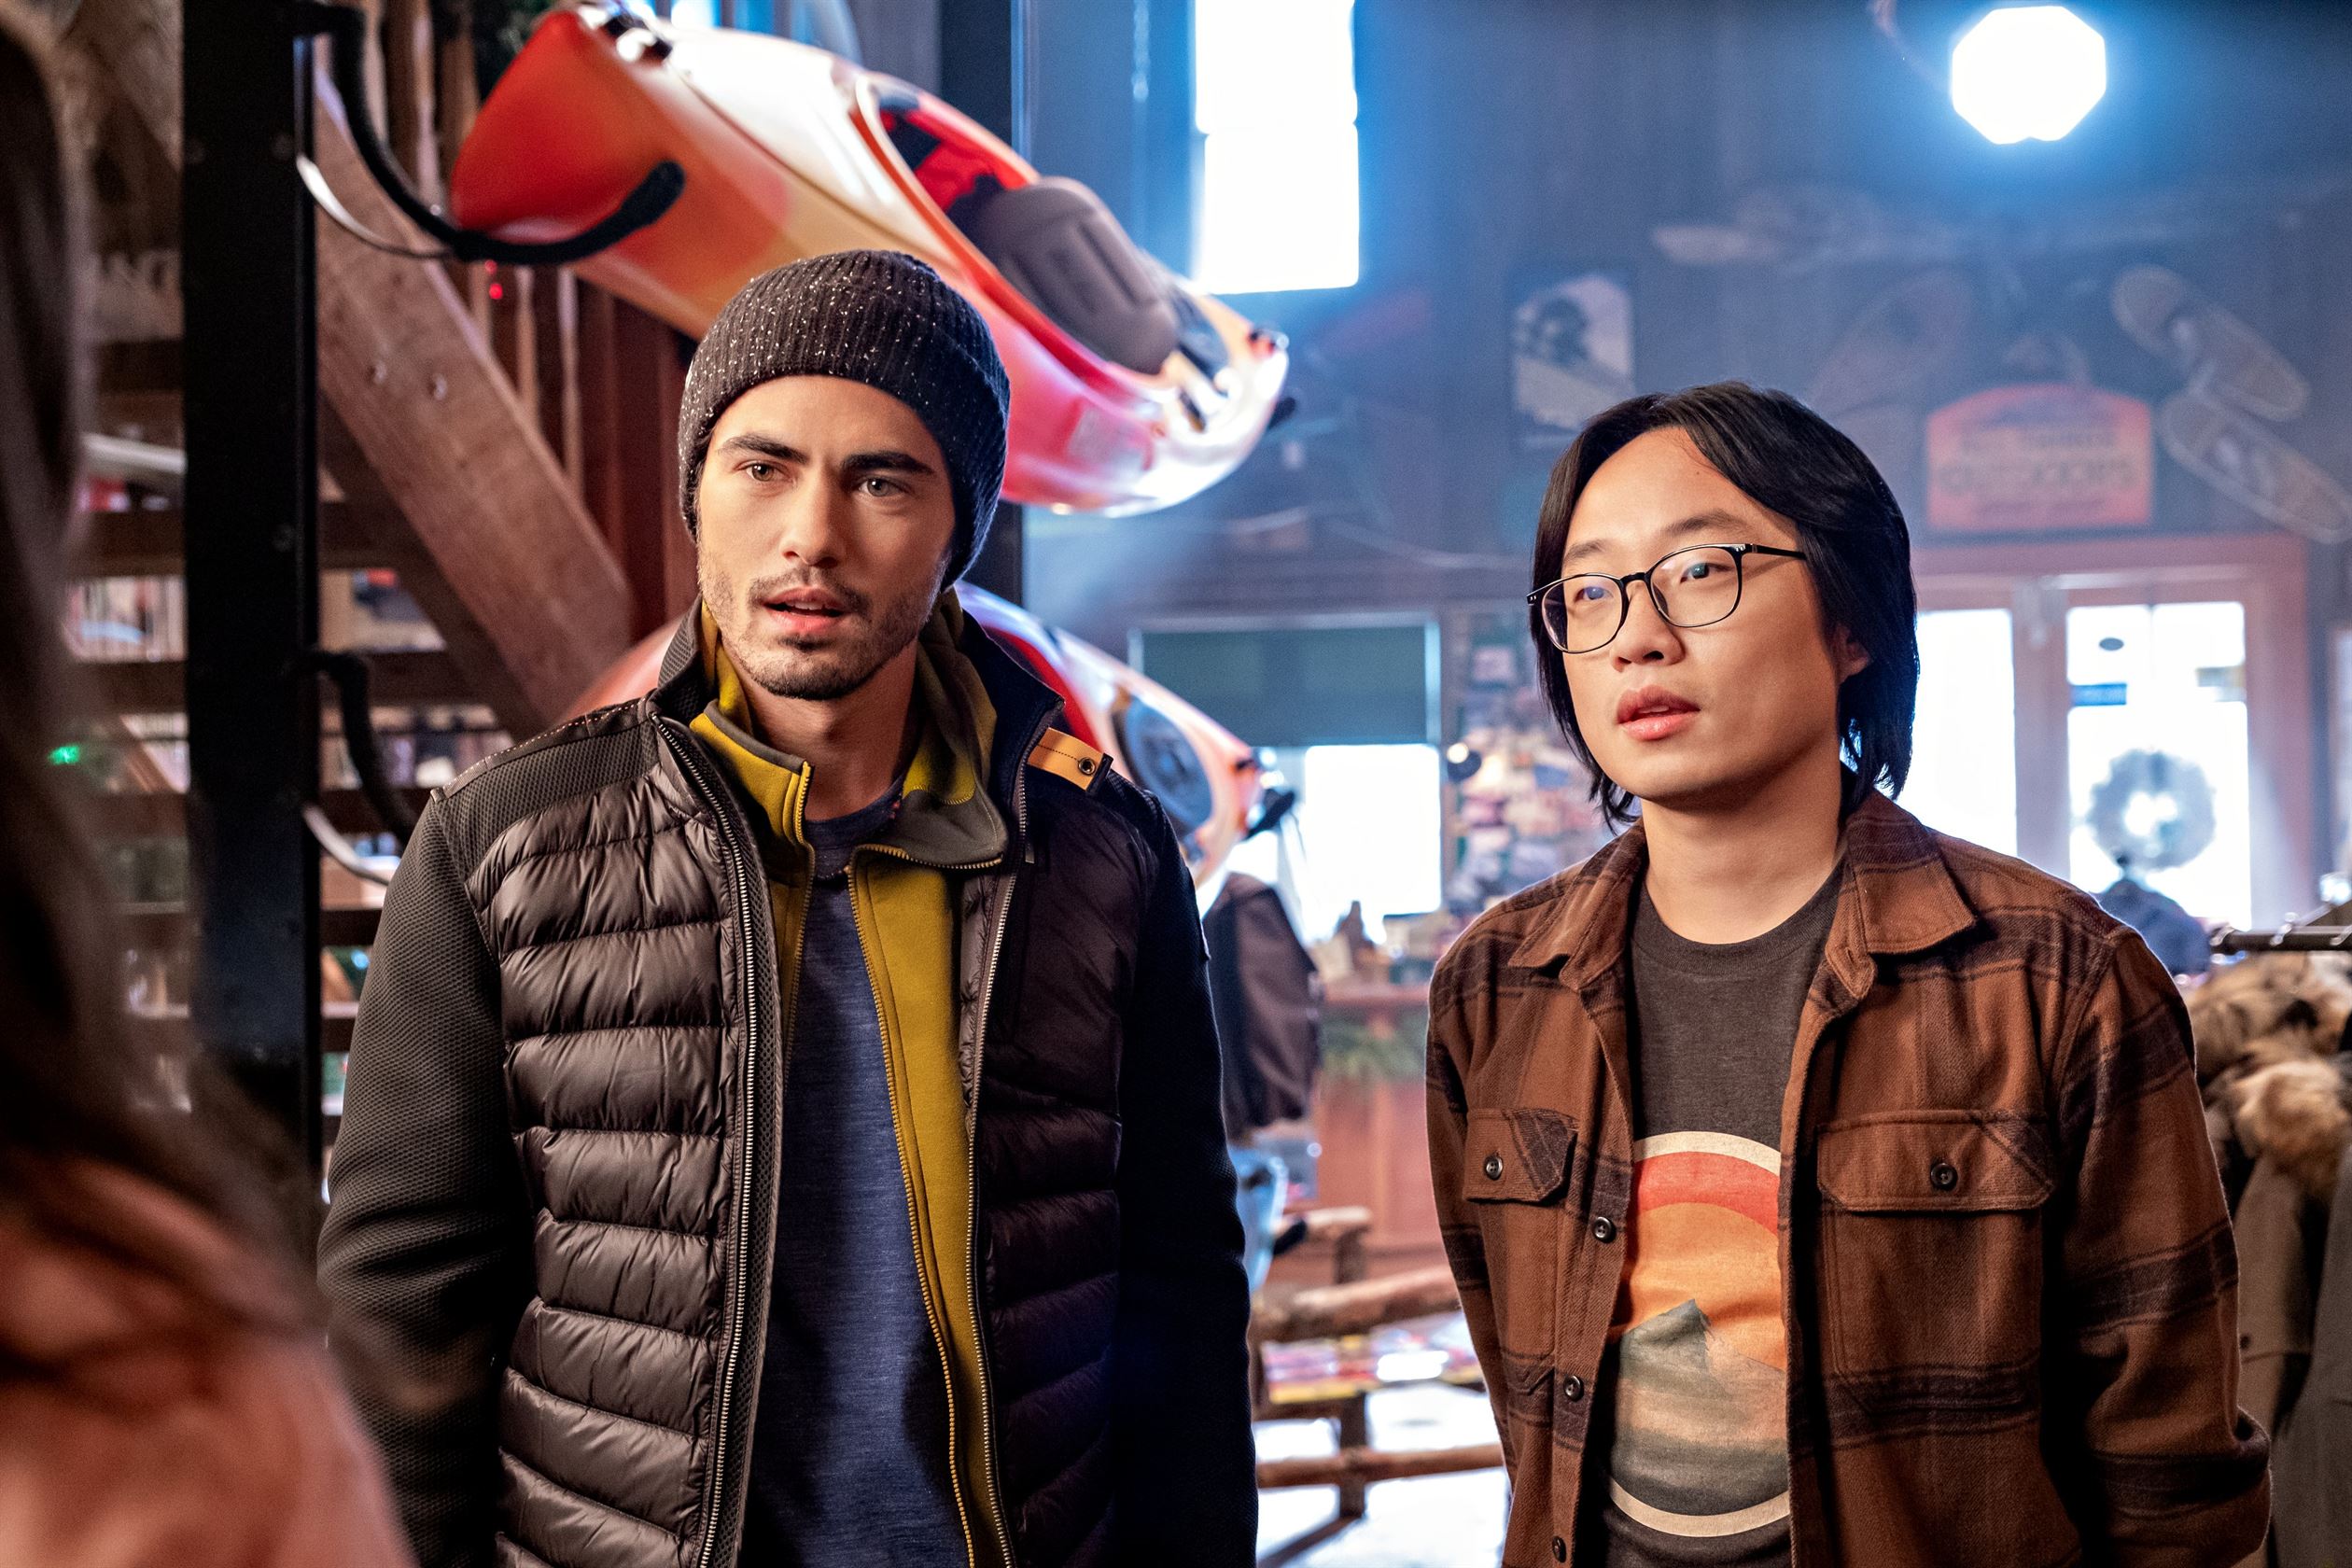 Darren Barnet (left) plays Tag, while Jimmy O. Yang (right) plays Josh. Photo courtesy of Netflix